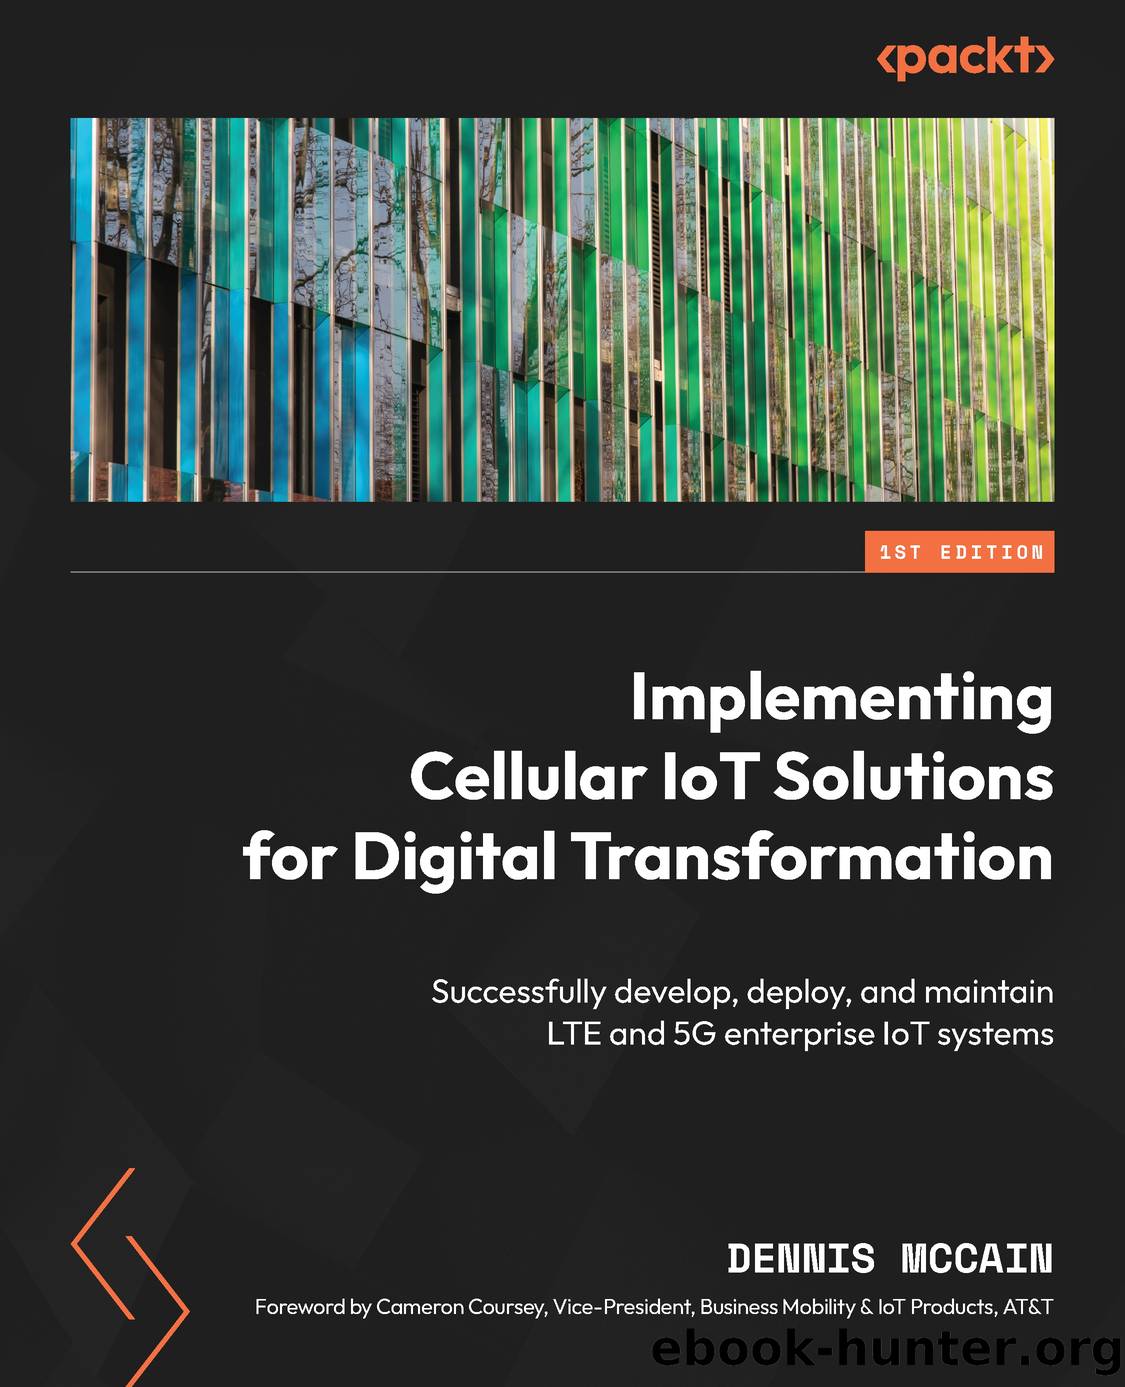 Implementing Cellular IoT Solutions for Digital Transformation by Dennis McCain